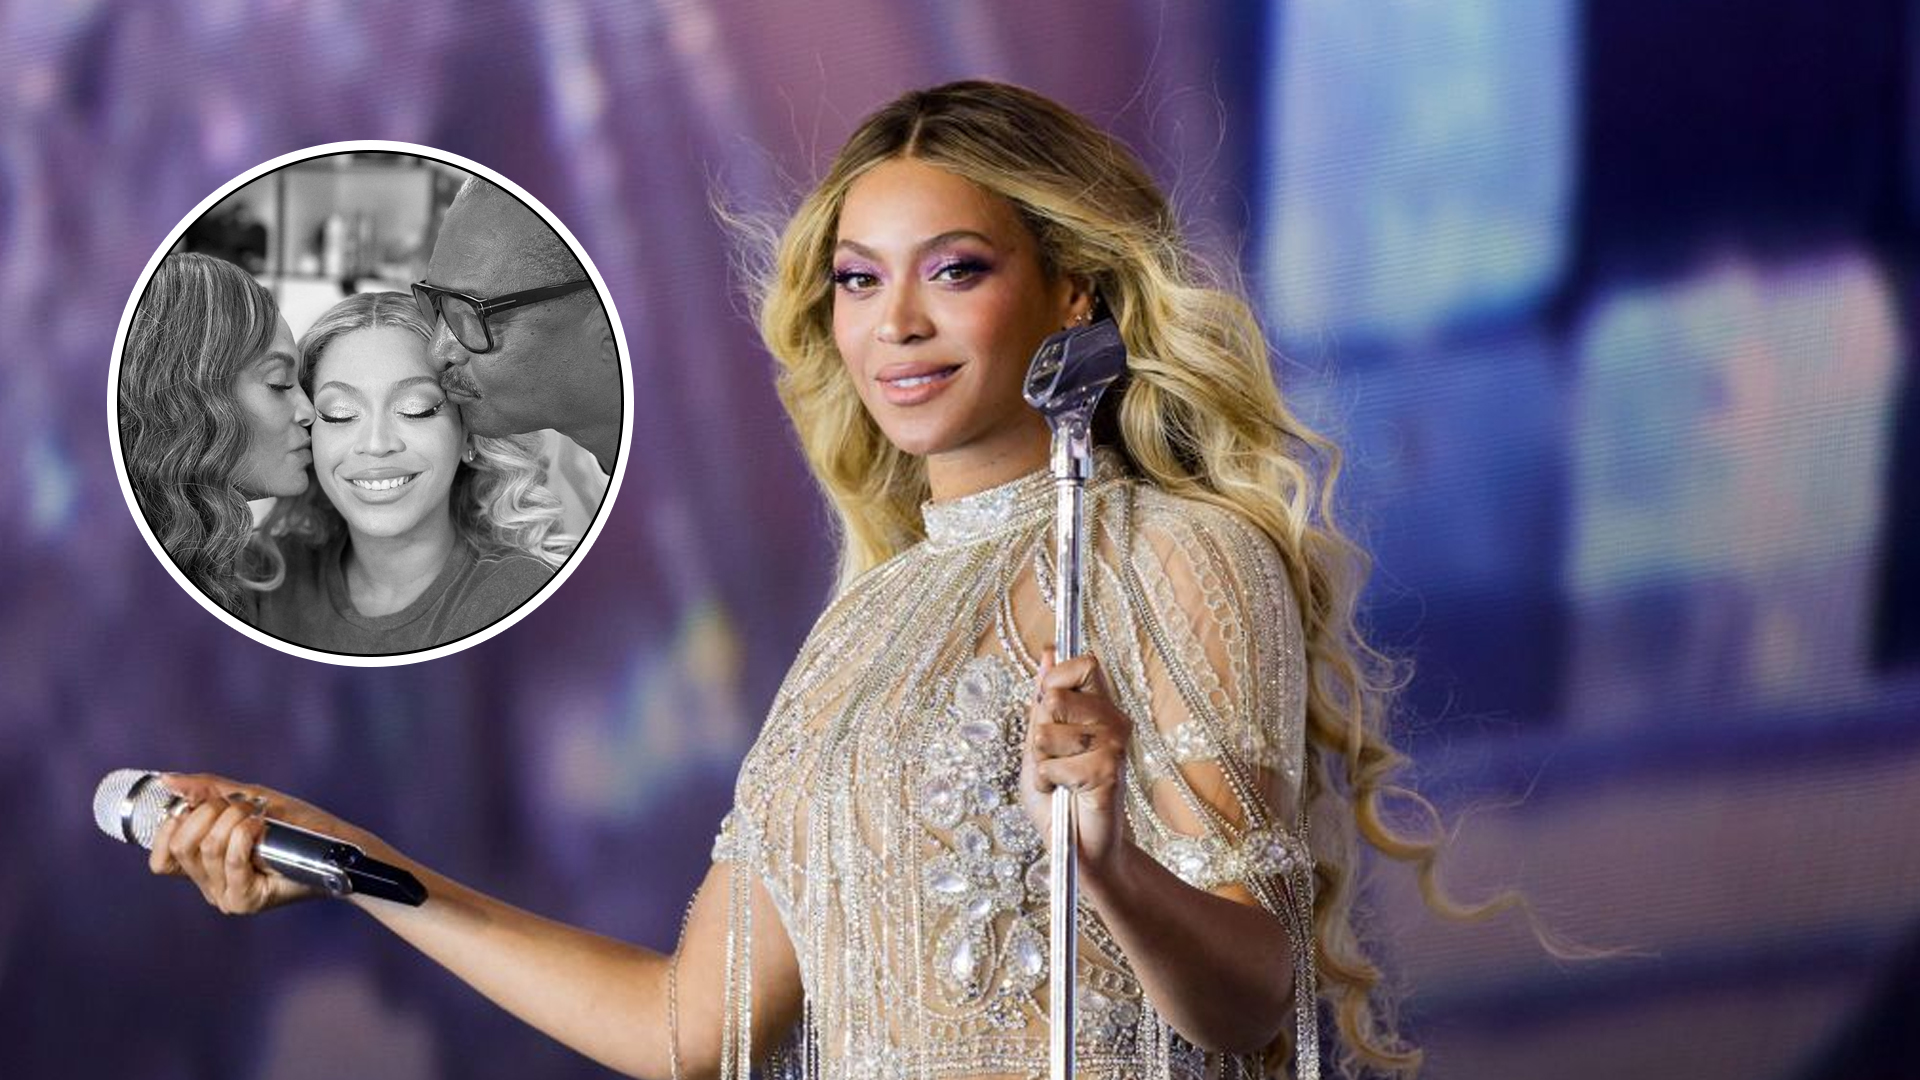 Beyonce Shared A Very Rare Photo With Her Parents.